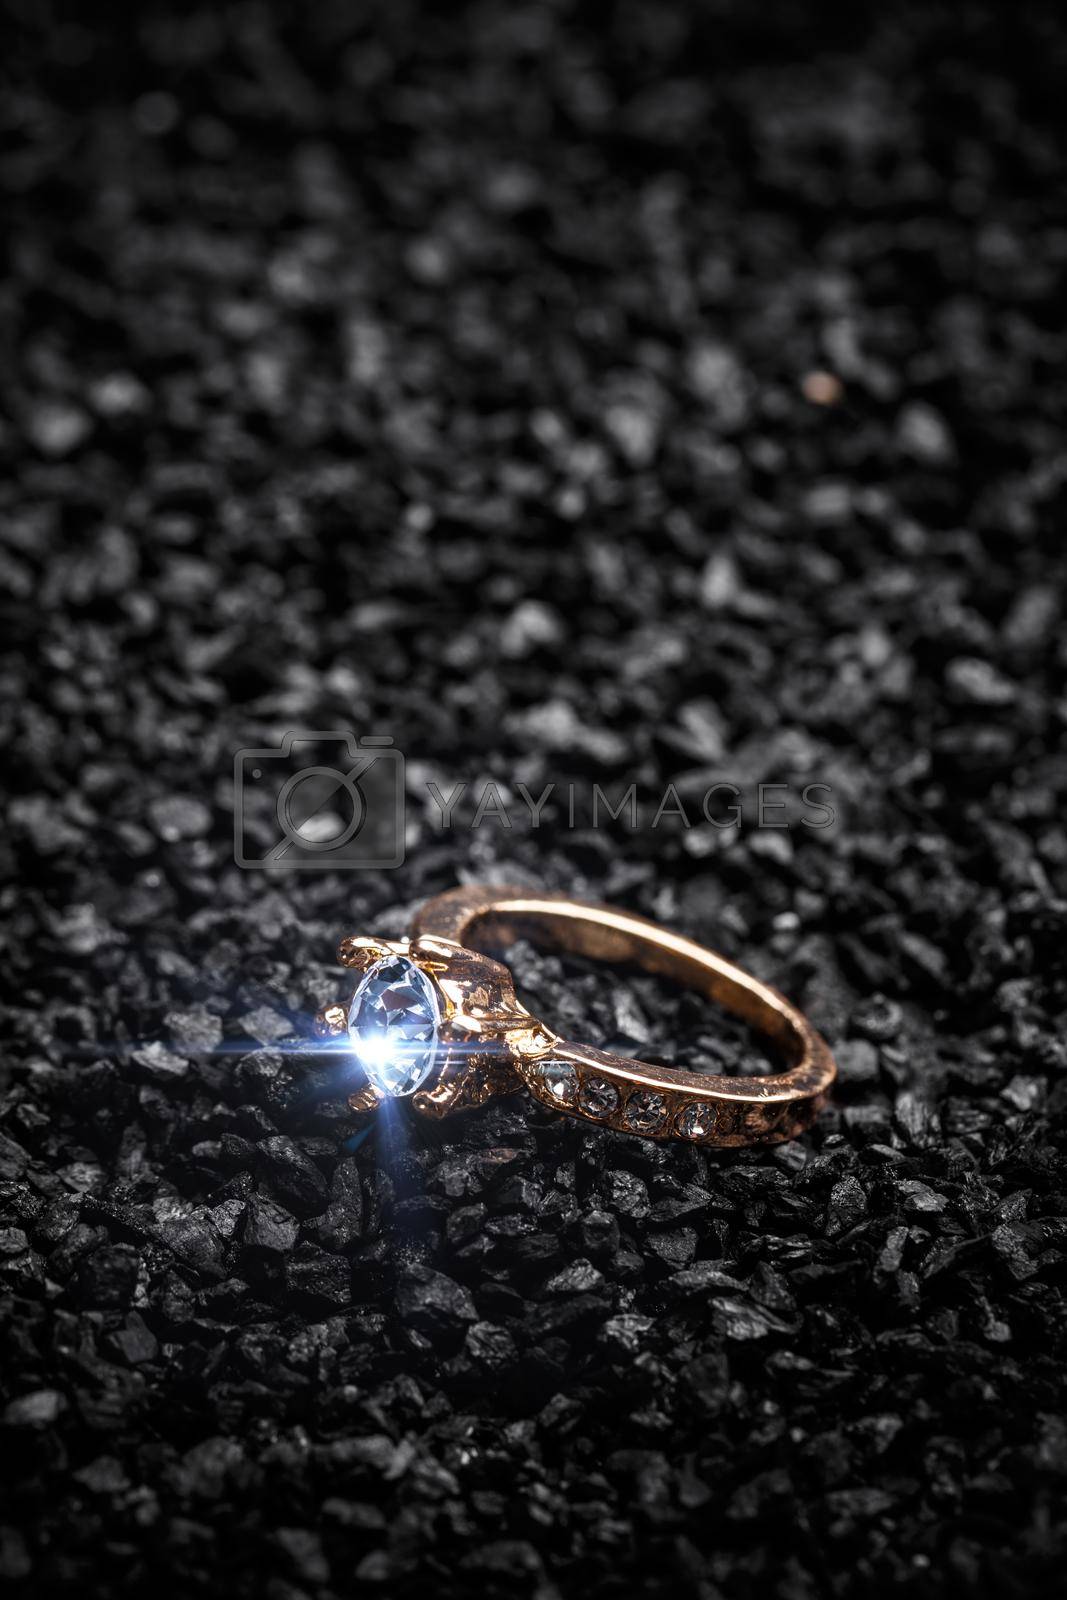 Royalty free image of Ring decorated with crystal by grafvision